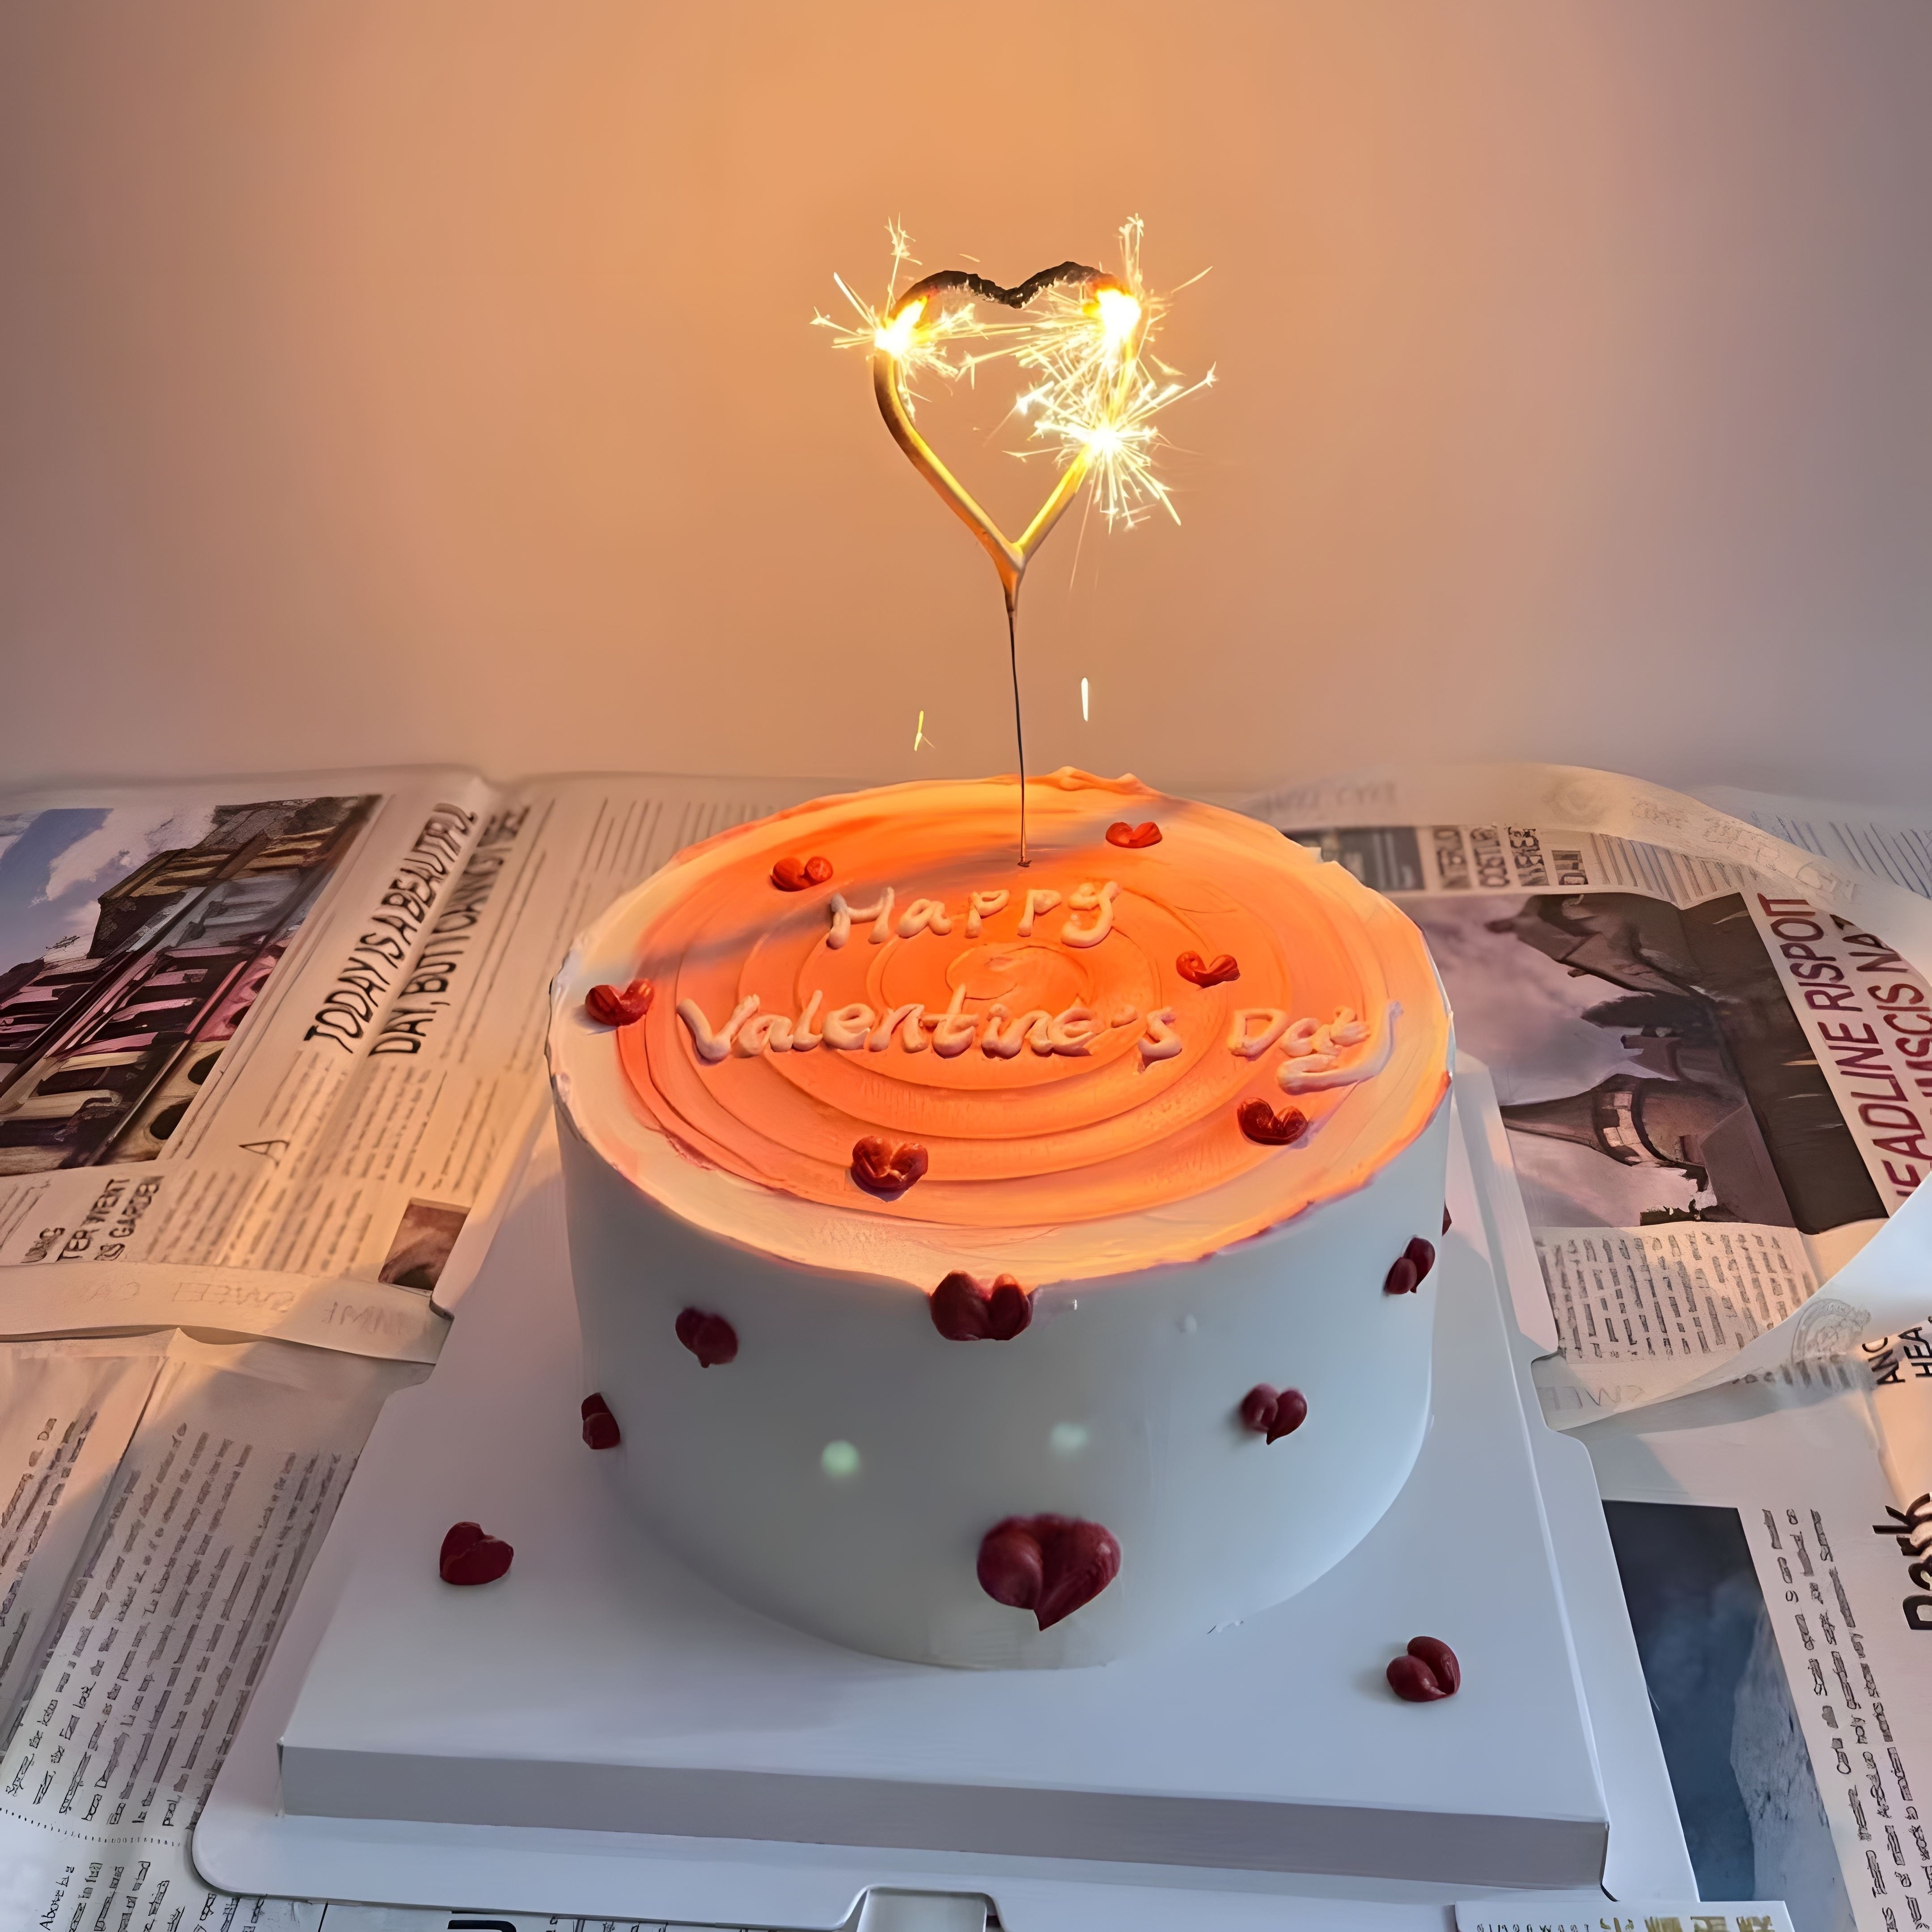 Valentines Day Heart Heart Shaped Candles Romantic Scented Delicate  Expression Tea Wax Decoration T9I00993 From Packing2010, $0.85